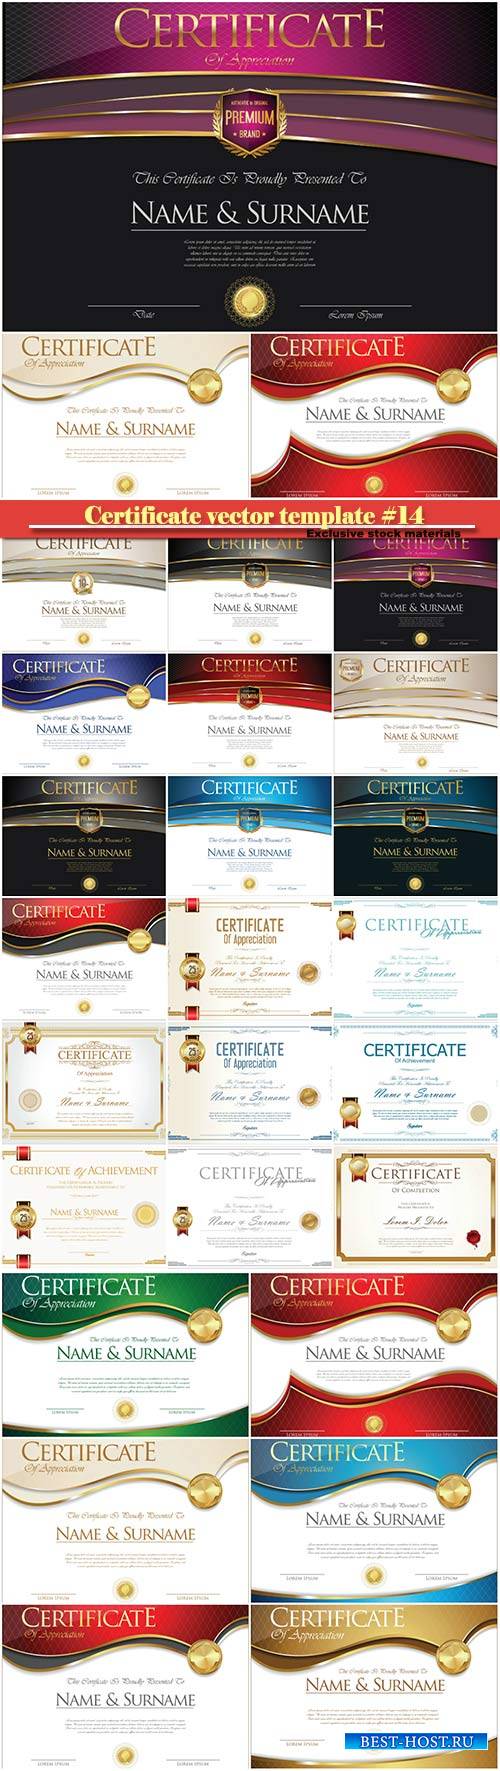 Certificate and vector diploma design template #14